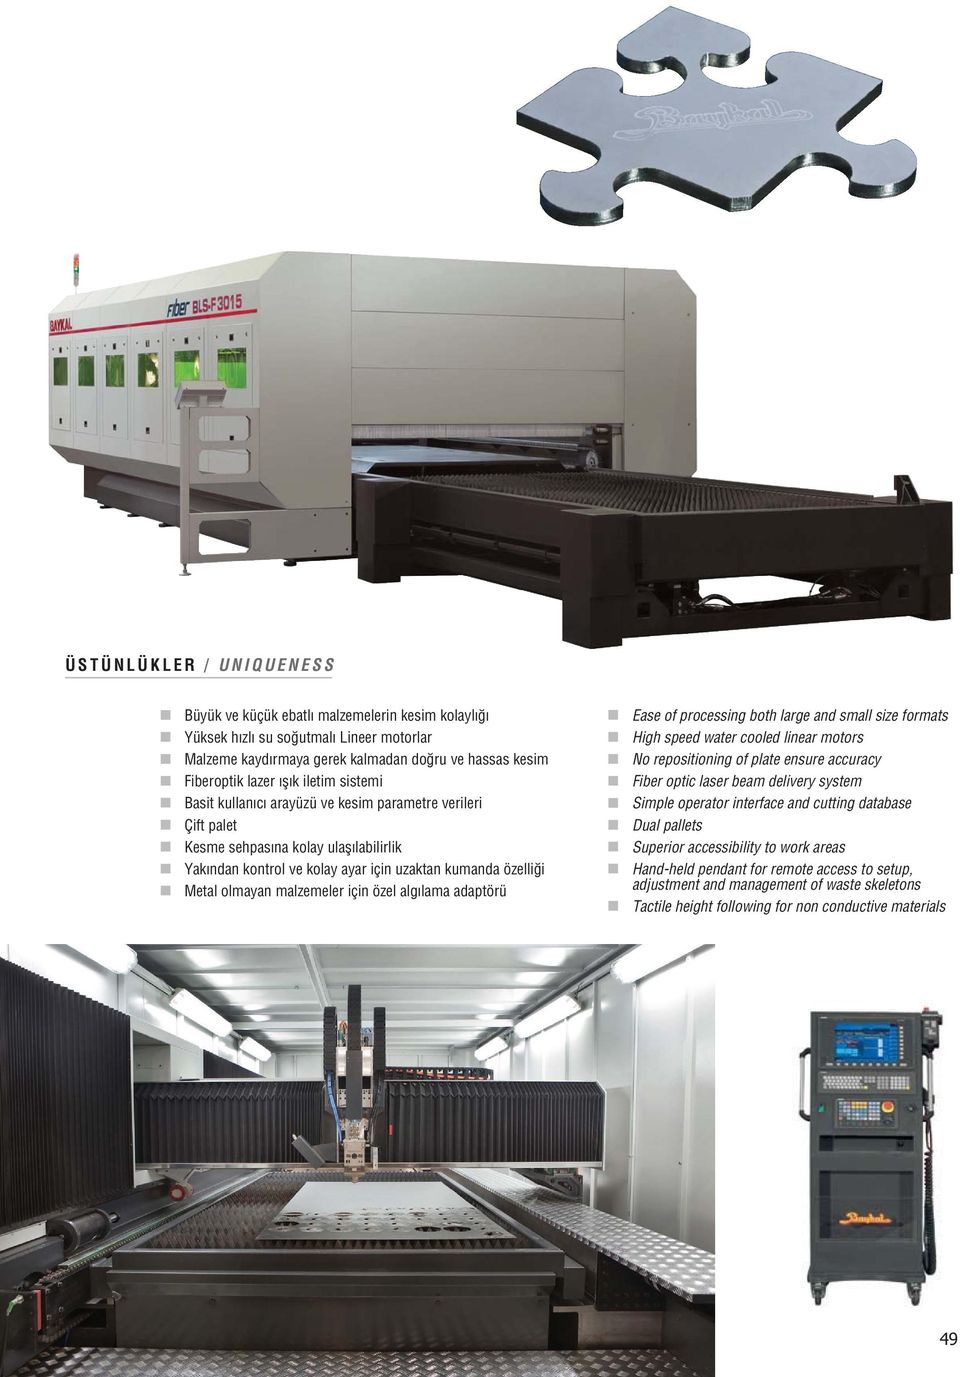 özel alg lama adaptörü Ease of processing both large and small size formats High speed water cooled linear motors No repositioning of plate ensure accuracy Fiber optic laser beam delivery system